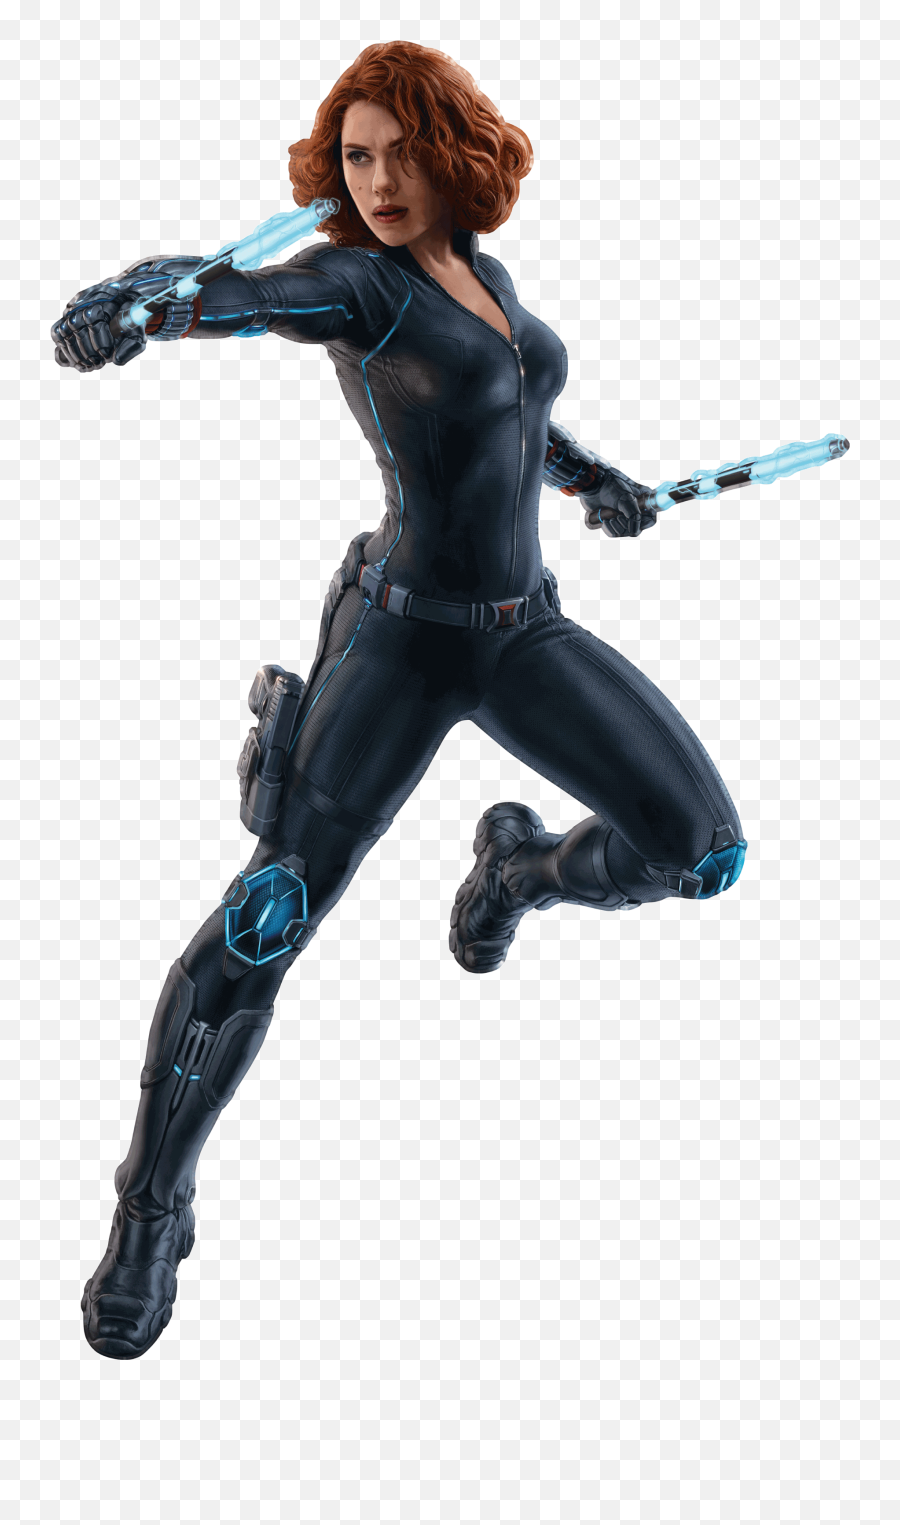 Avengers Png Transparent Images Free Download Clip Art - Black Widow Avengers Png,The Avengers Png